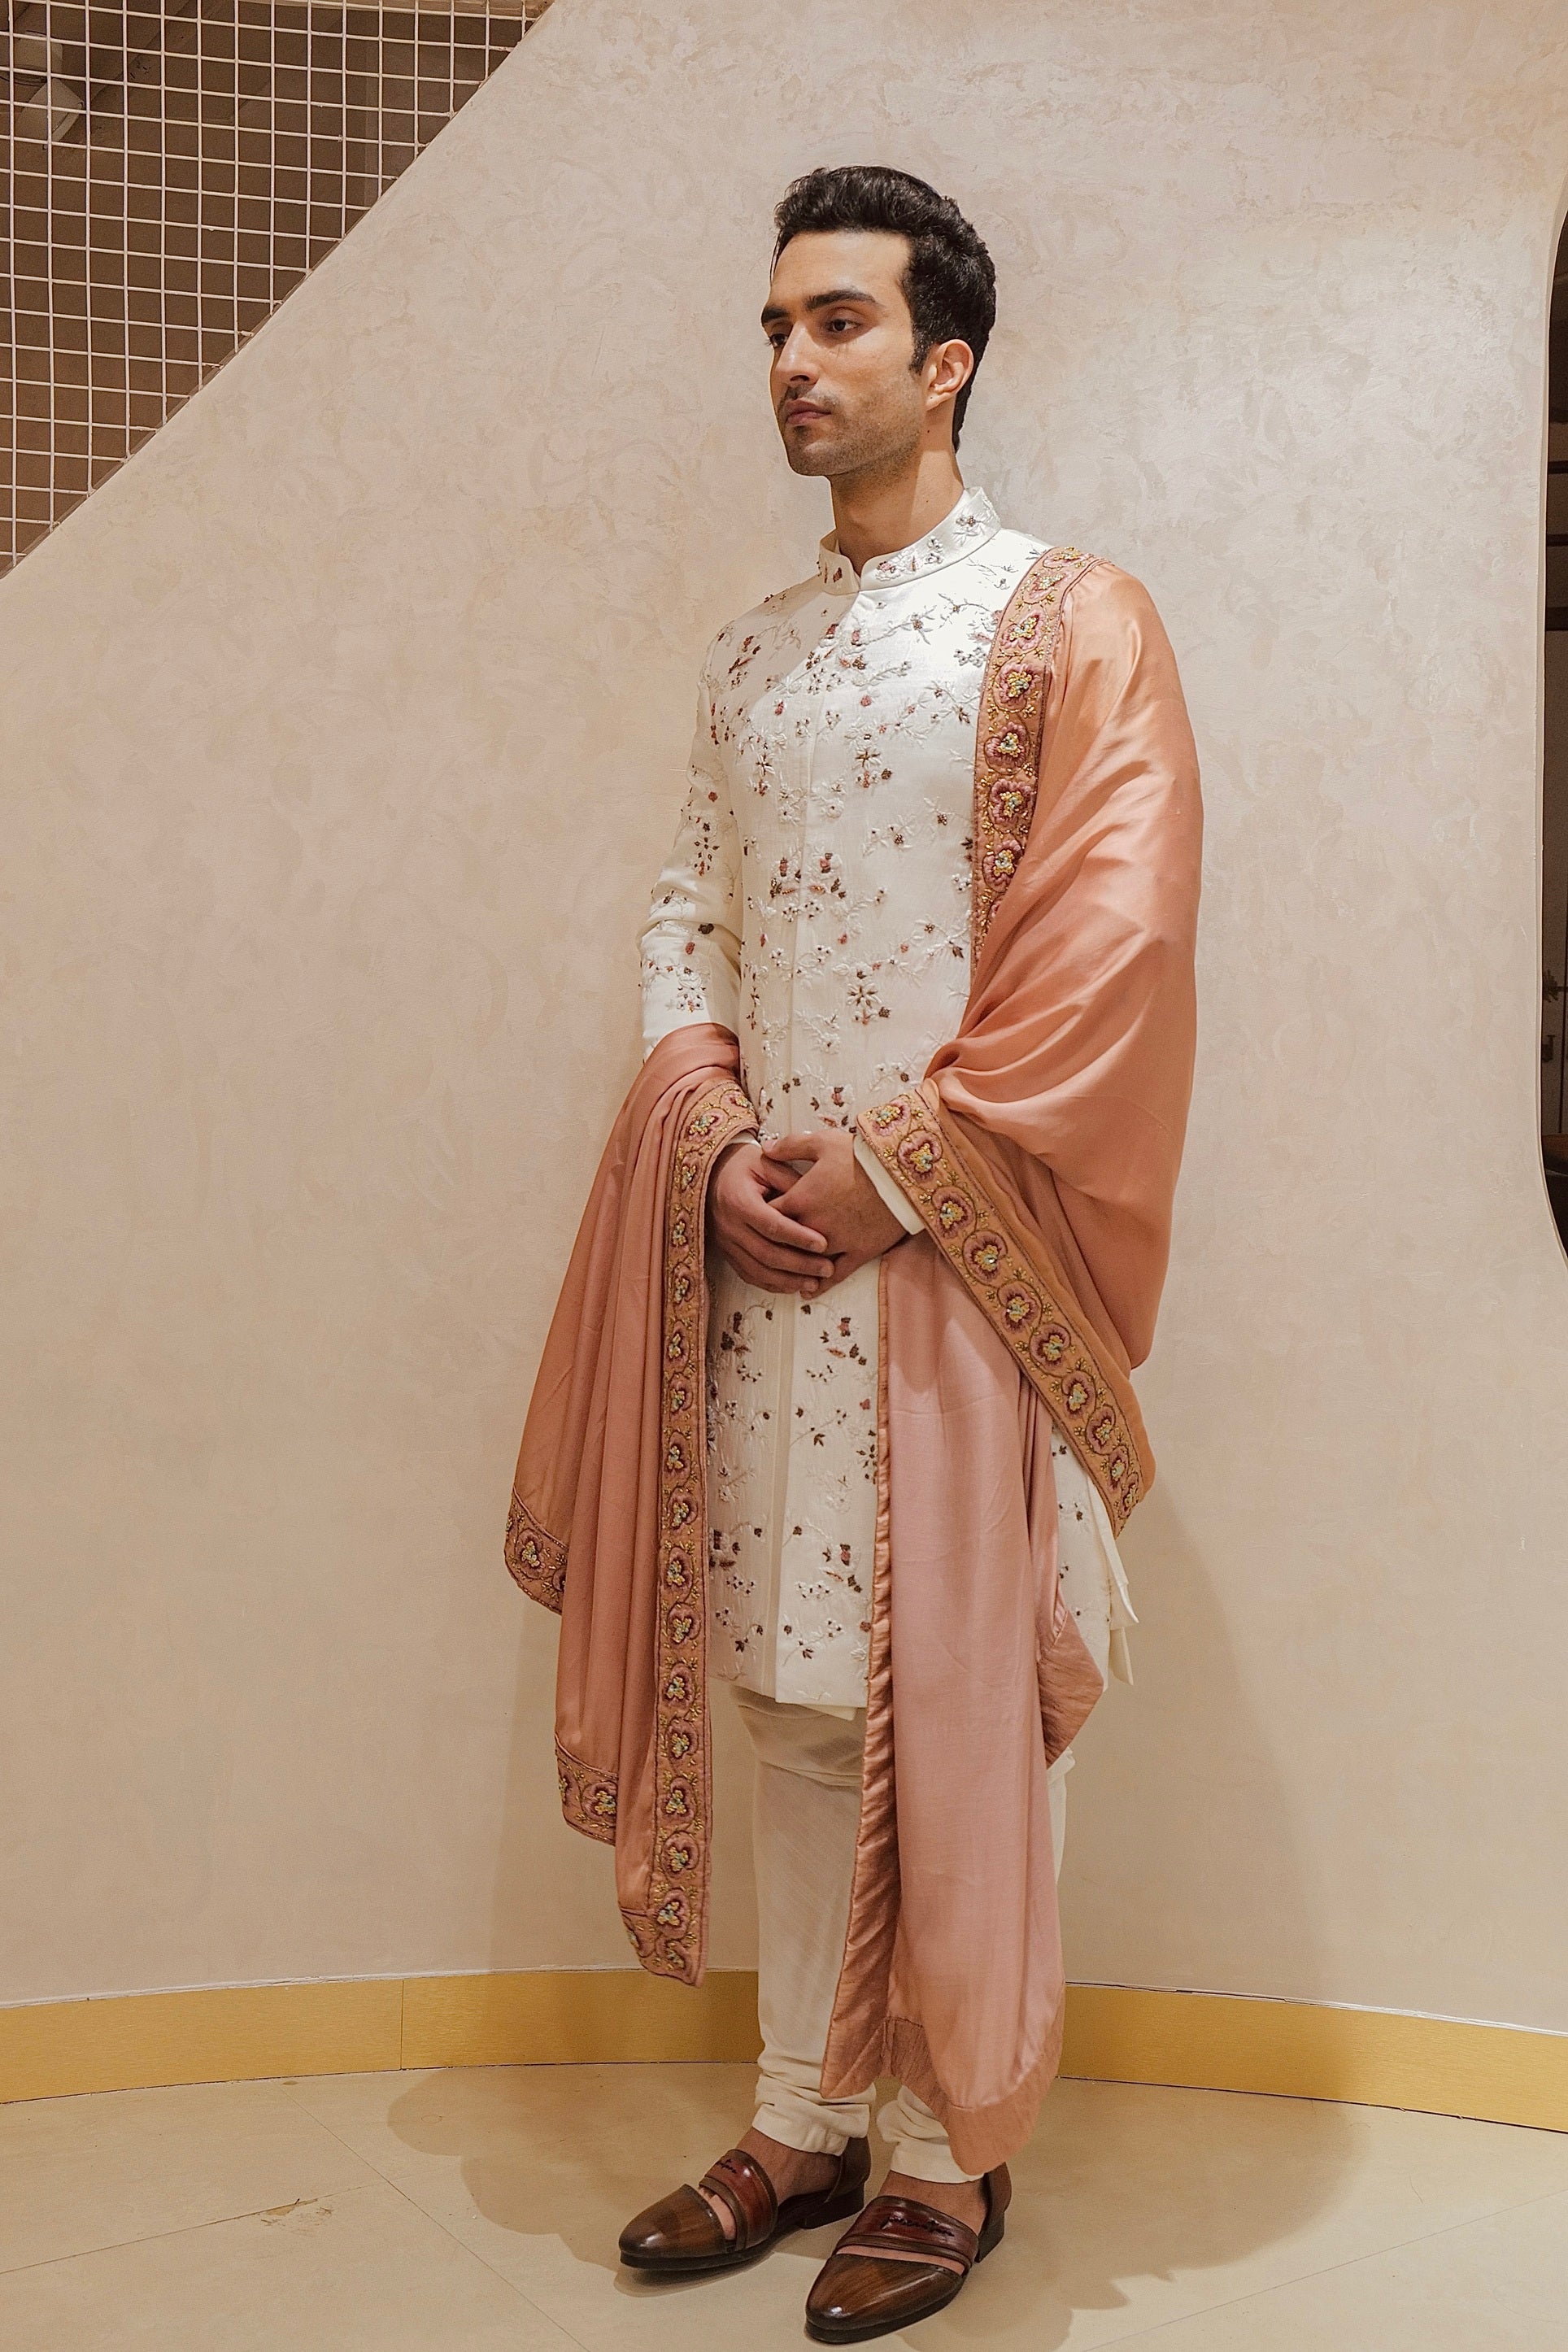 The Regal White Sherwani Set: Commanding attention with majestic elegance.